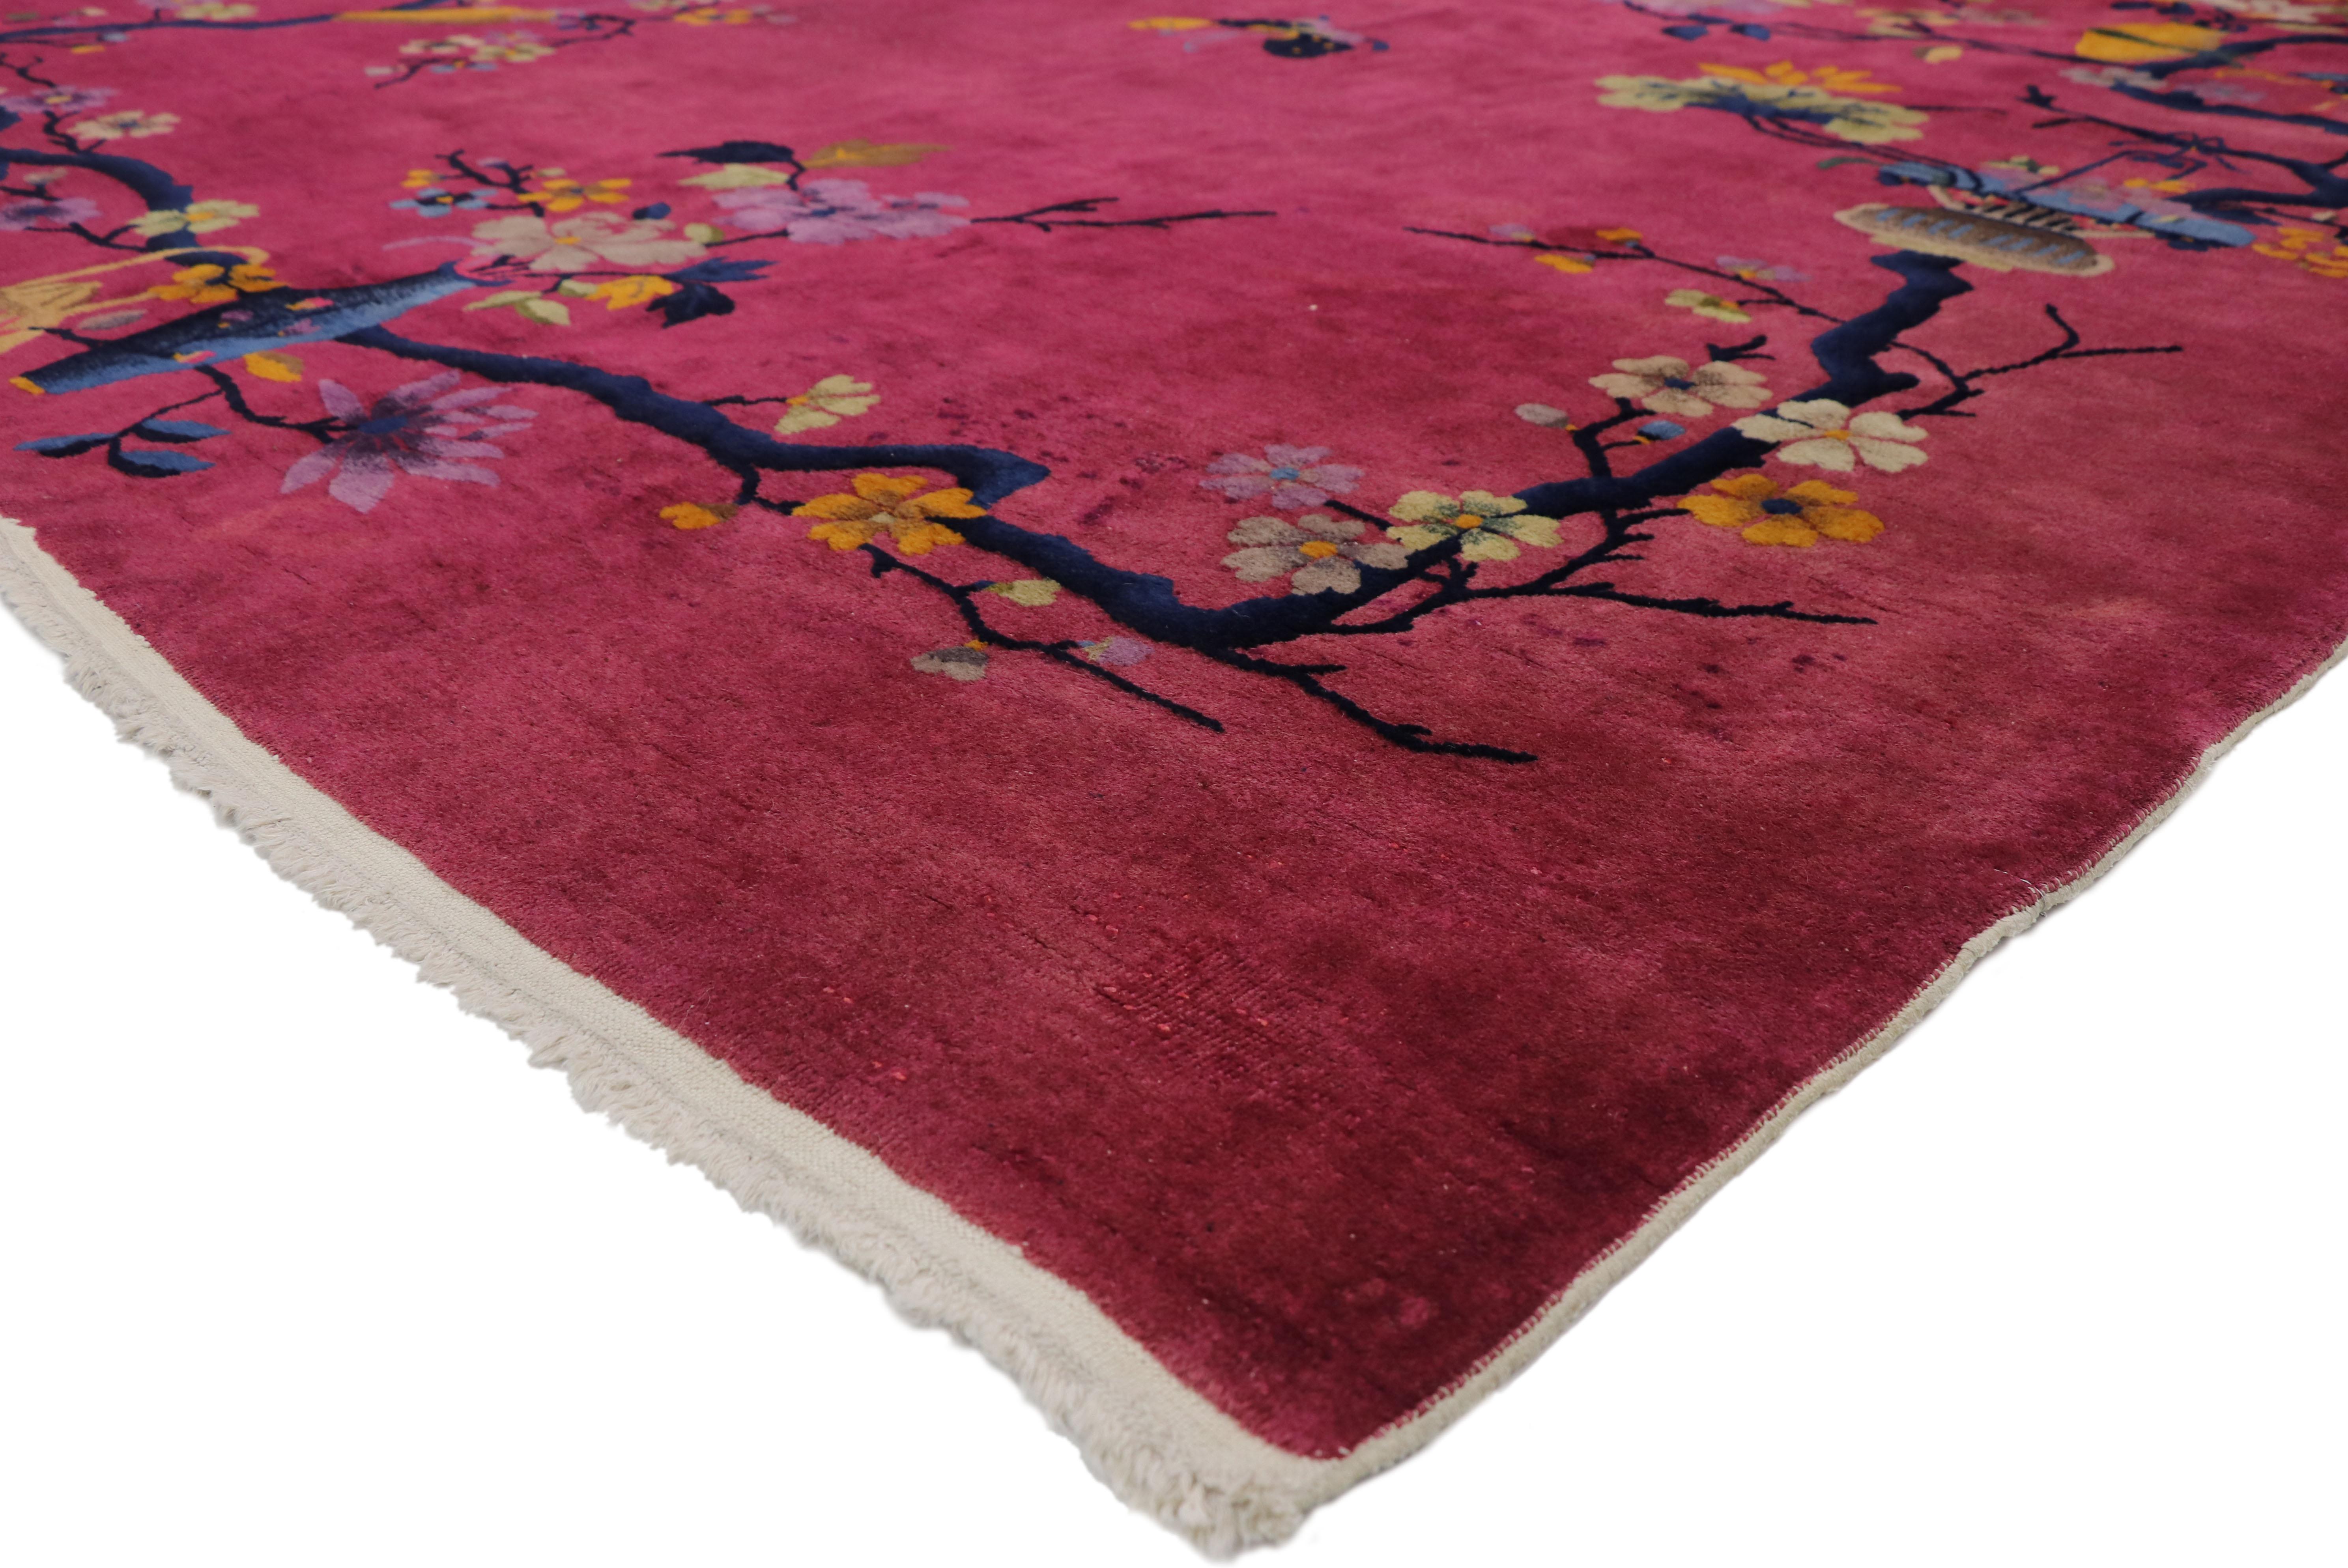 77363, magenta pink antique Chinese Art Deco rug with pictorial chinoiserie design. This hand knotted wool antique Chinese Art Deco rug features a gorgeous pictorial floral garland design overlaid upon an abrashed pink field. A variety of flower